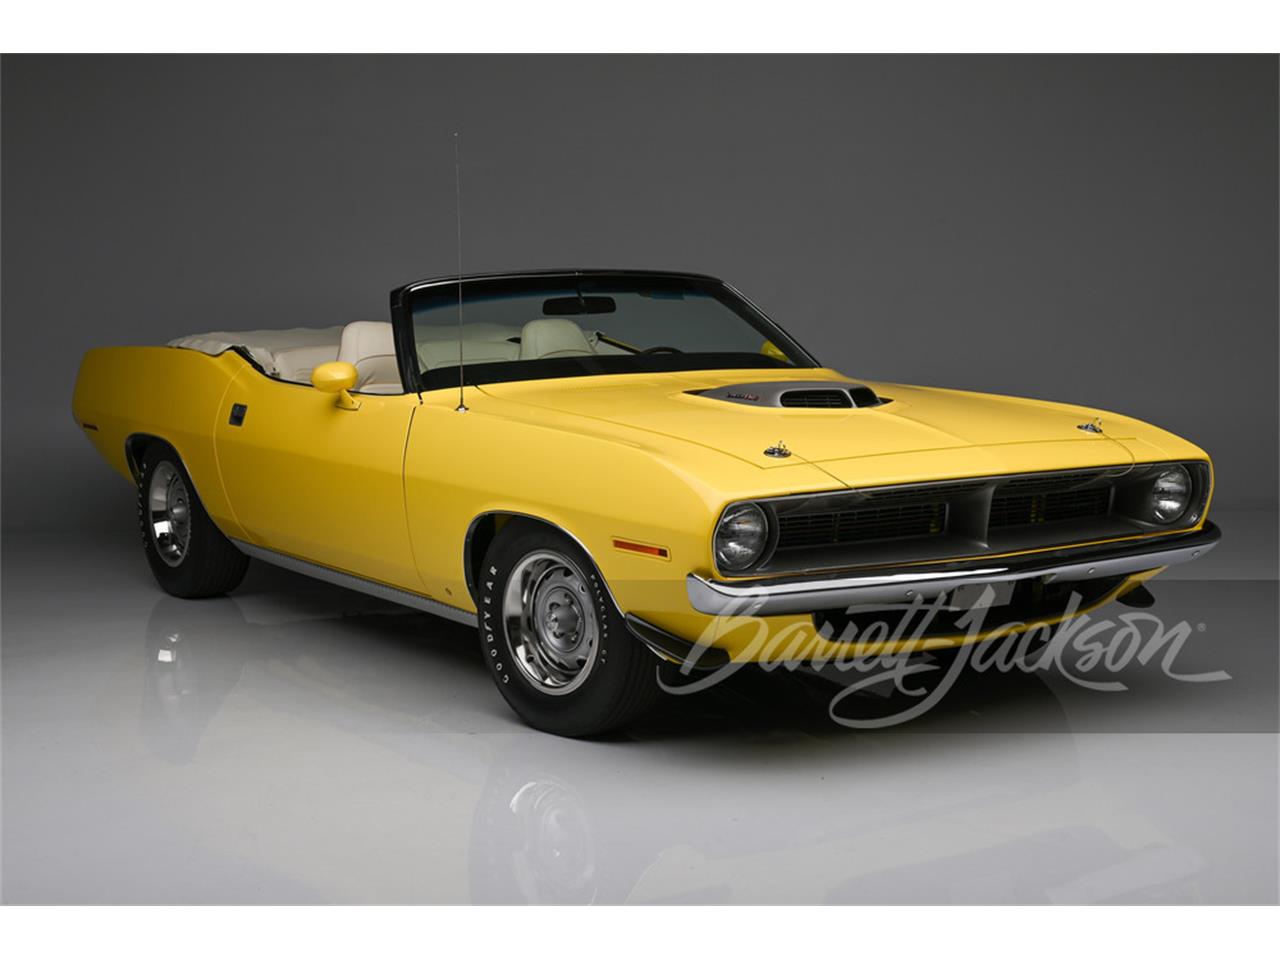 For Sale at Auction: 1970 Plymouth Cuda in Scottsdale, Arizona for sale in Scottsdale, AZ